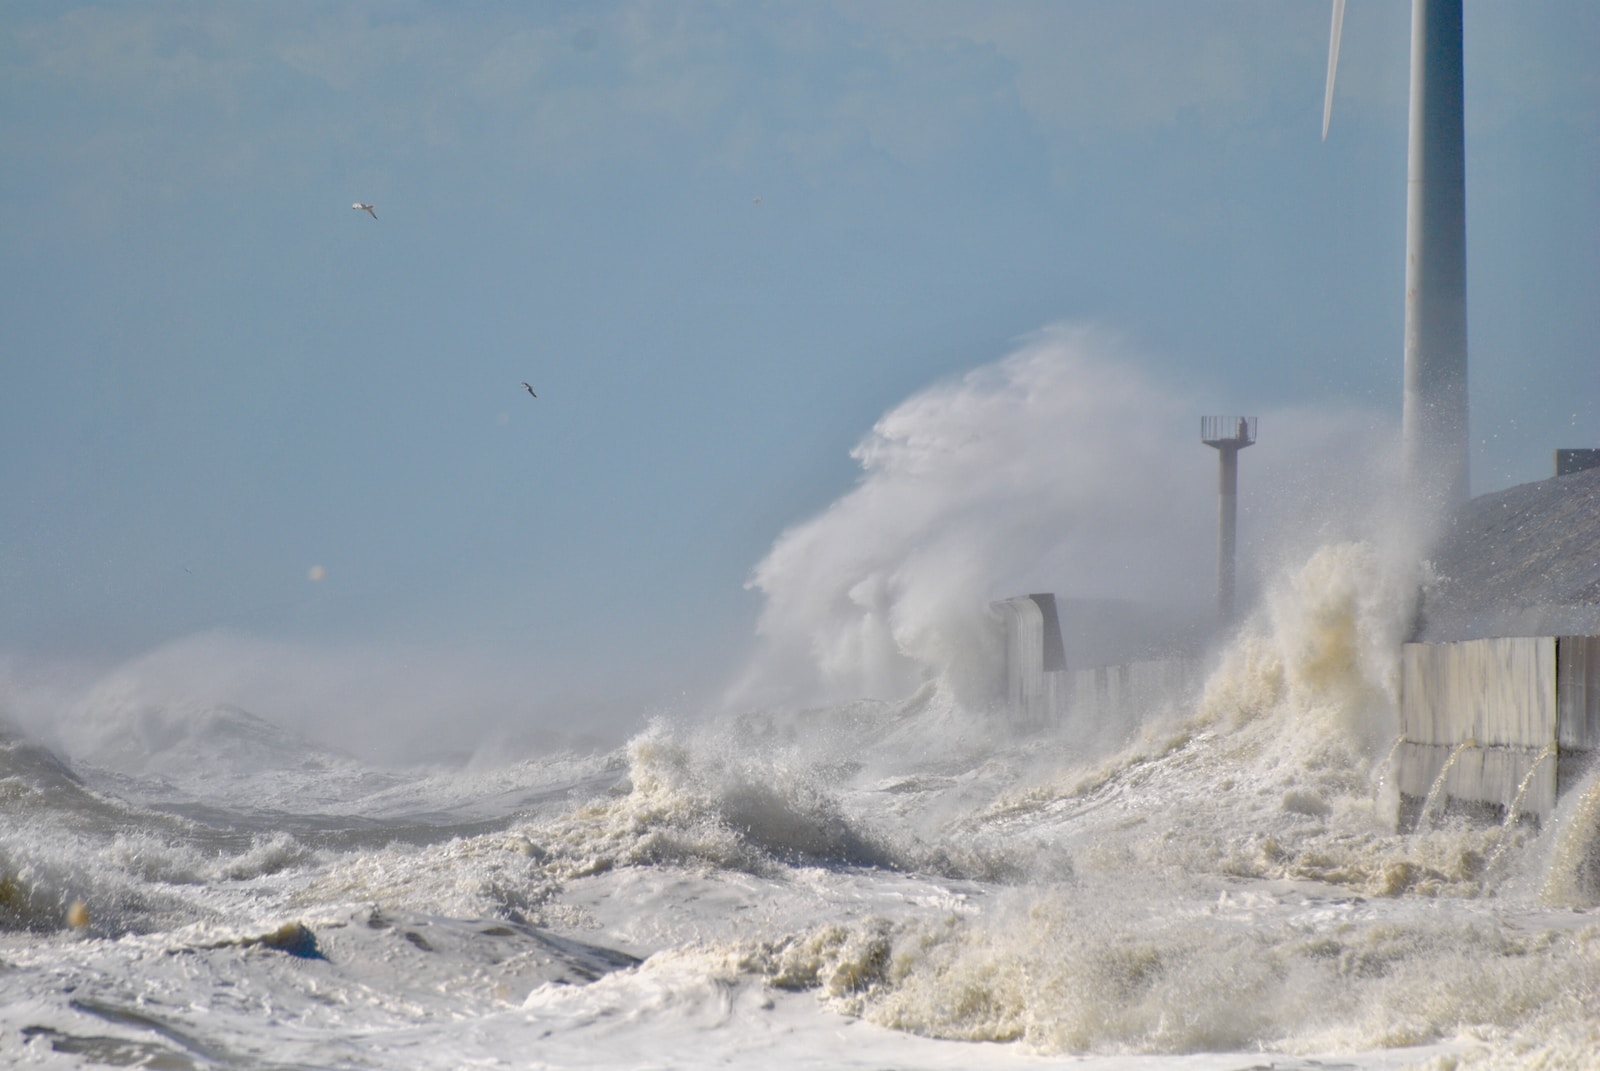 a large wave crashes against a building and wind turbines